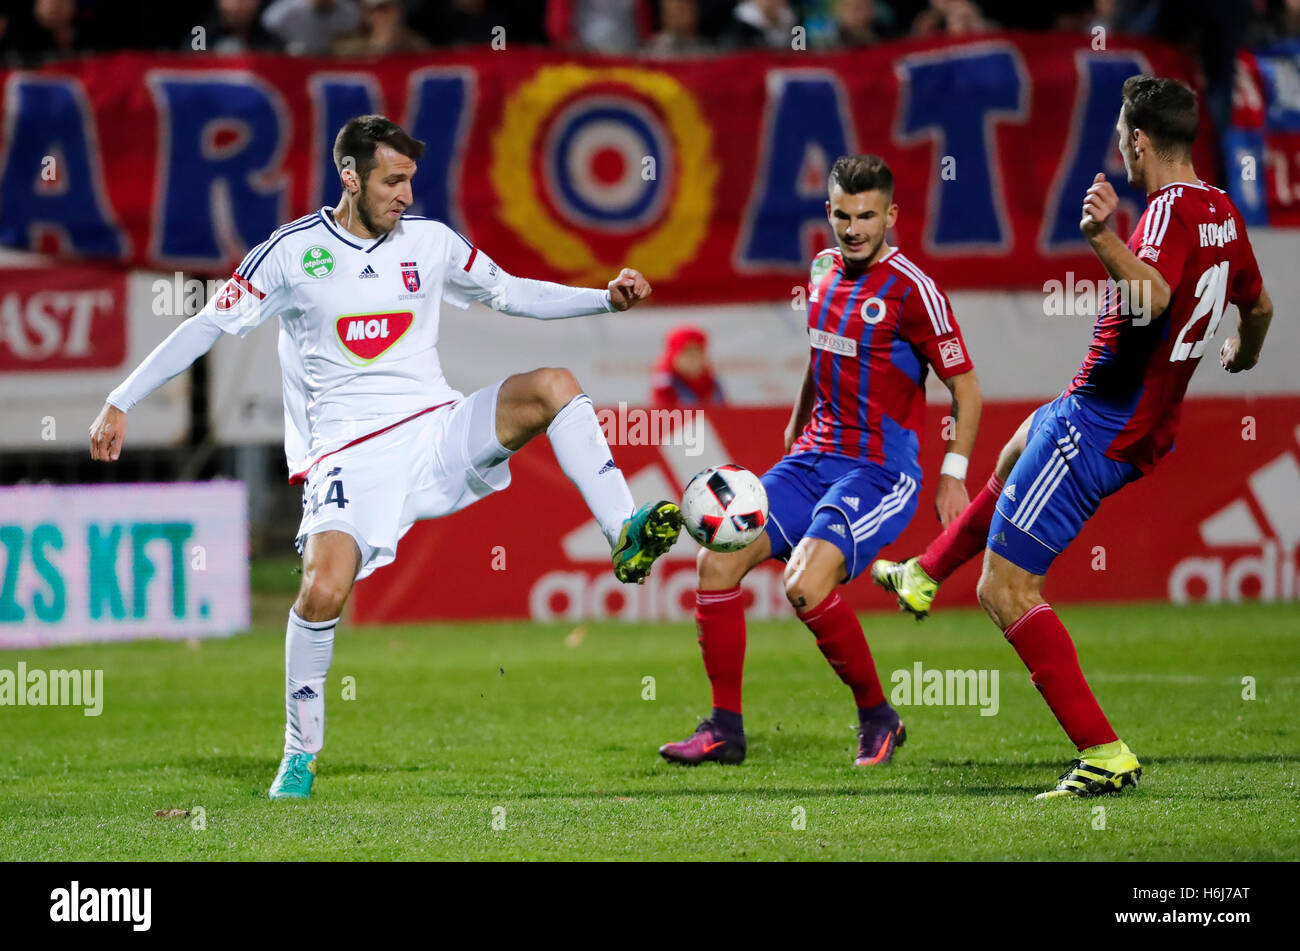 Budapest, Hungary. 29th October, 2016. Marko Scepovic #44 of Videoton FC  competes for the ball with Zsolt Korcsmar #21 of Vasas FC and Szilveszter  Hangya (M) of Vasas FC during the Hungarian